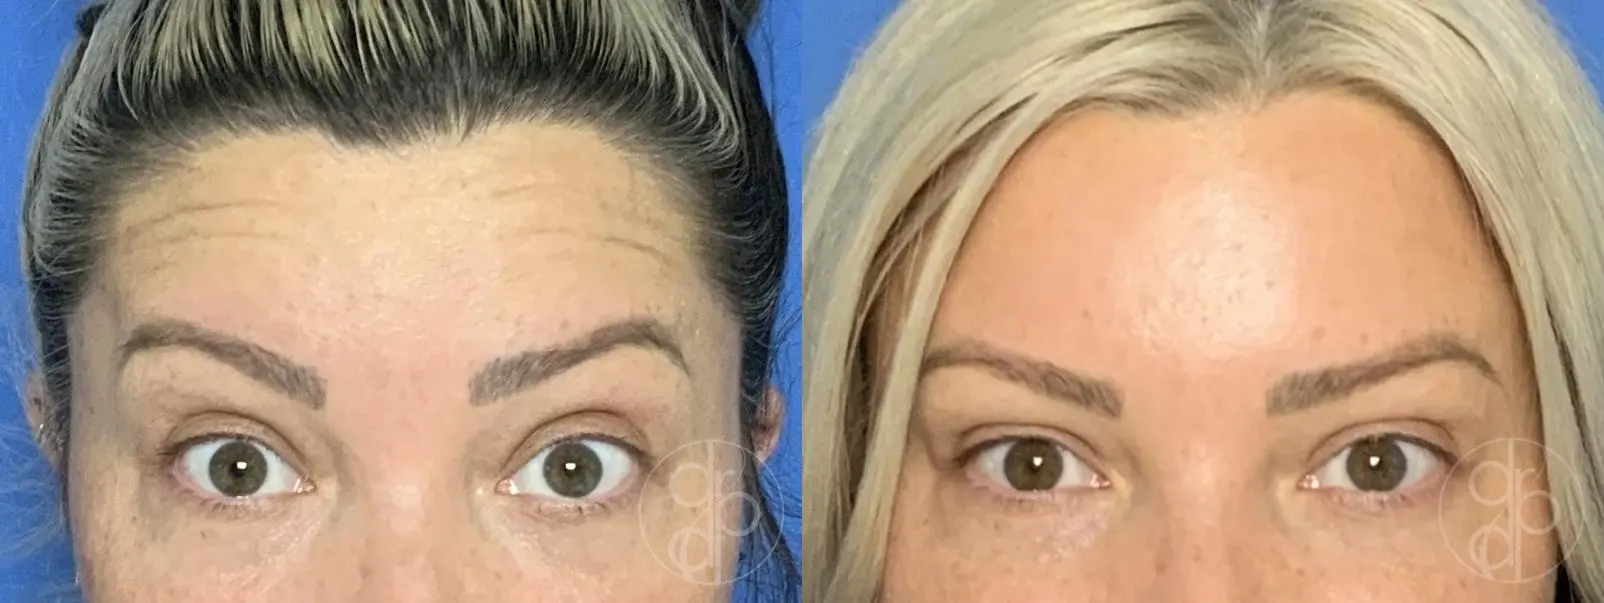 patient 13983 injectables before and after result - Before and After 2